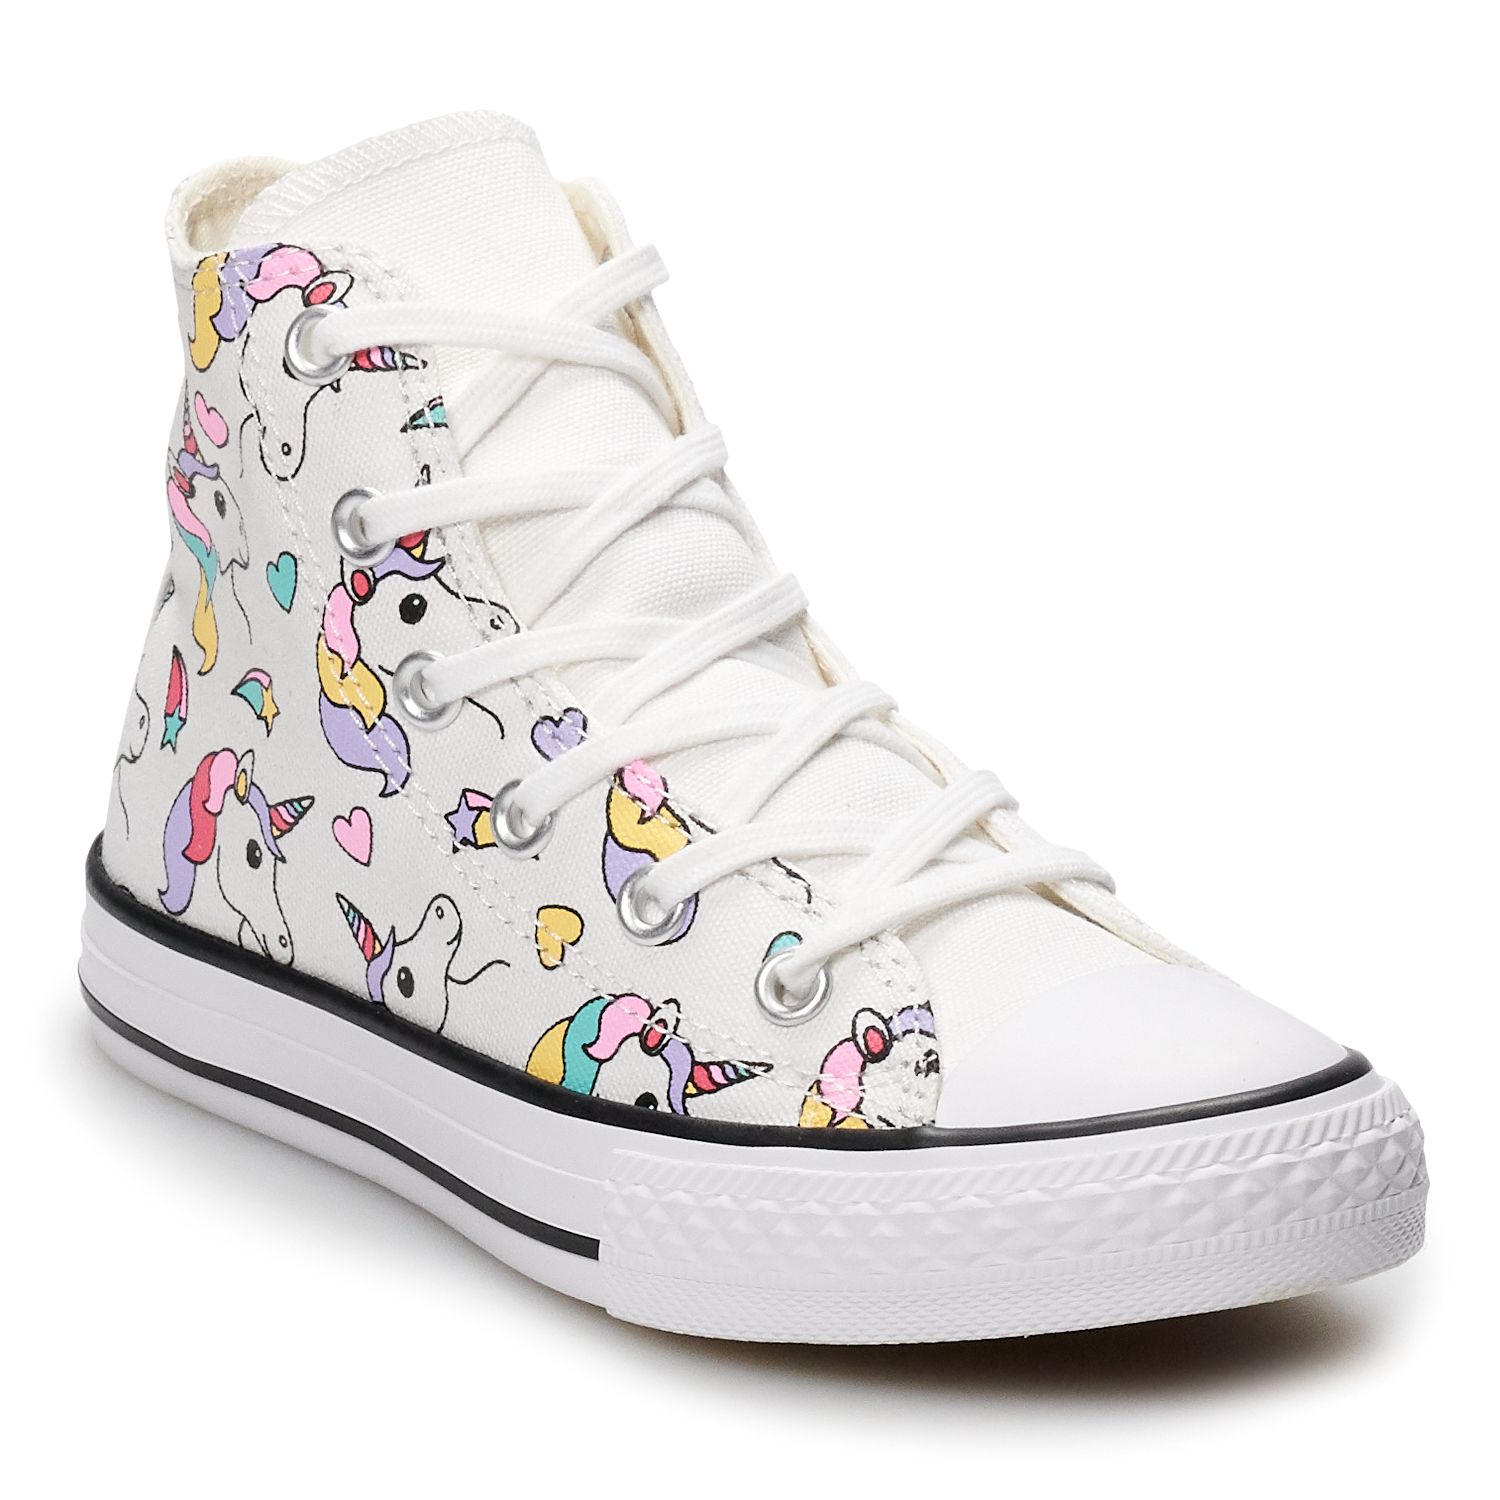 converse all star shoes for girls printed